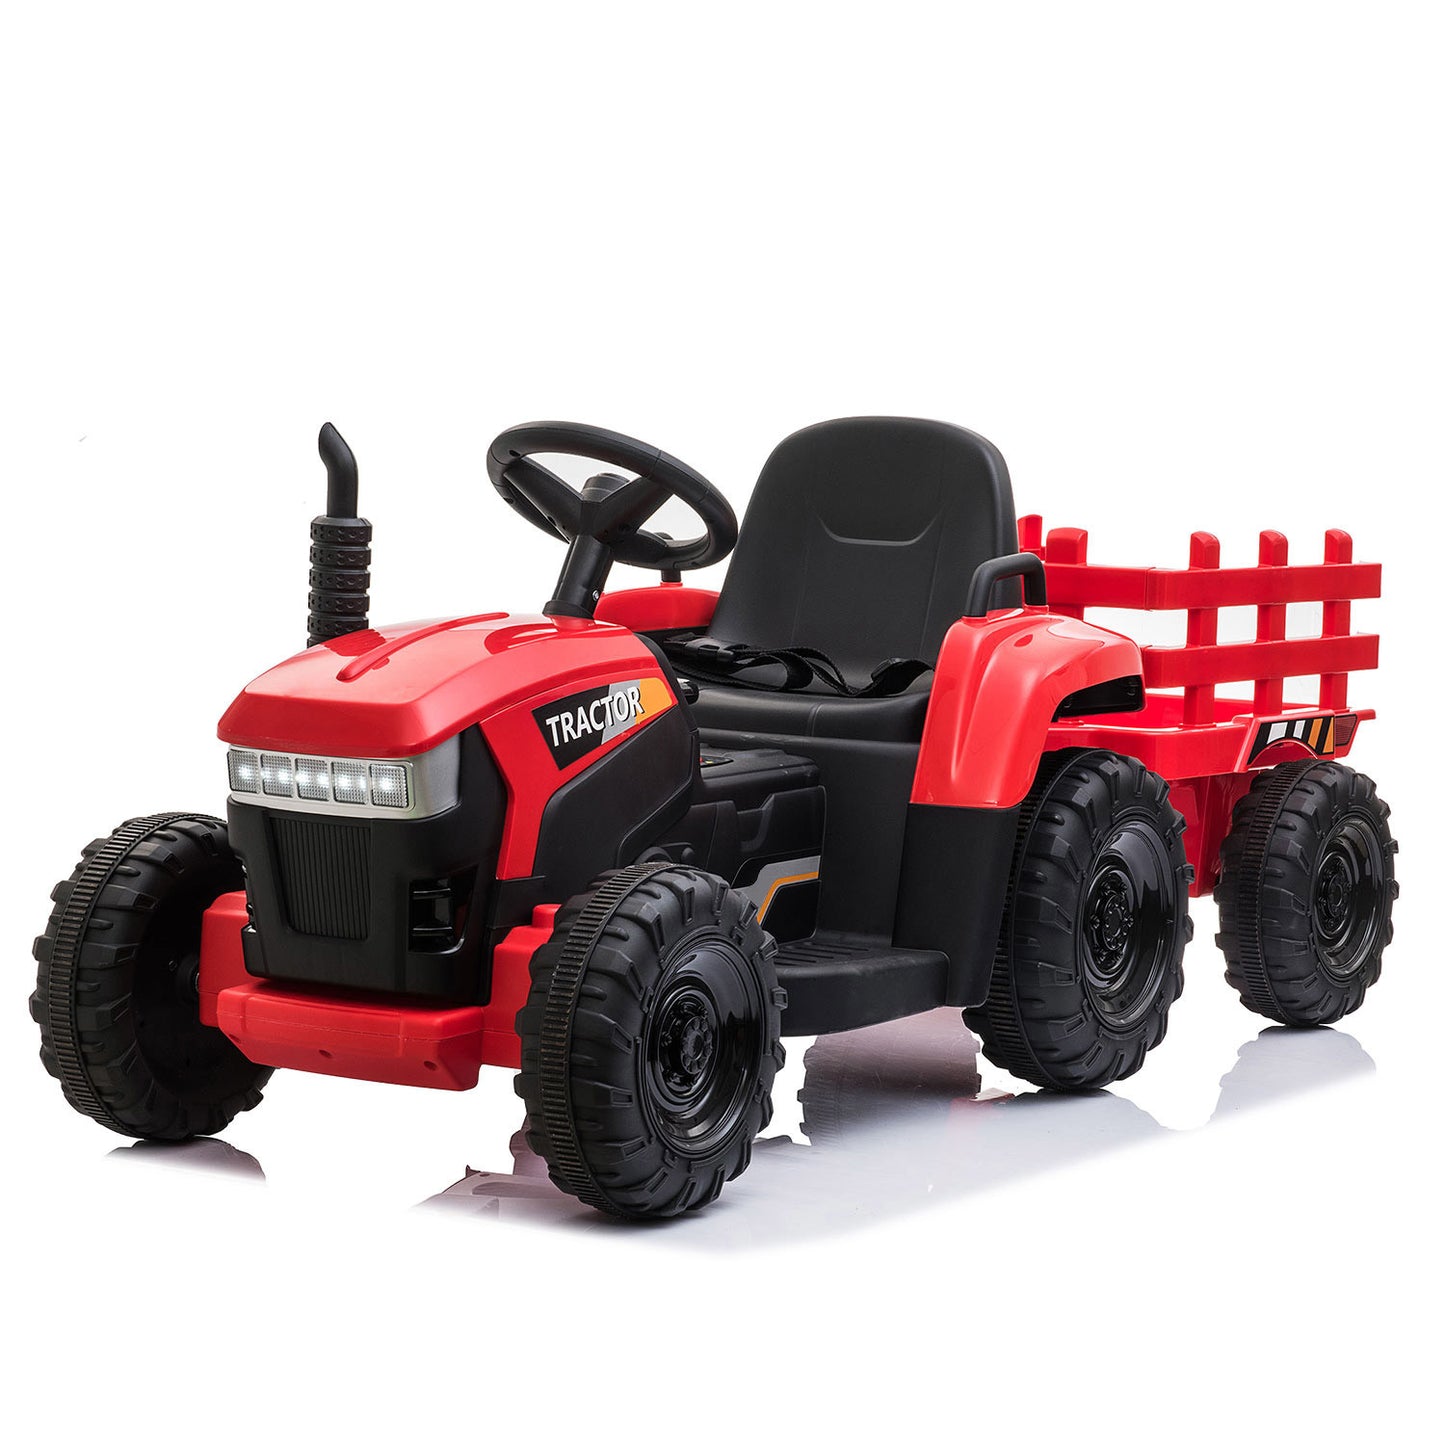 12V Kids Ride On Tractor with Trailer, Battery Powered Electric Car w/ Music, USB, Music, LED Lights, Vehicle Toy for 3 to 6 Ages, Red